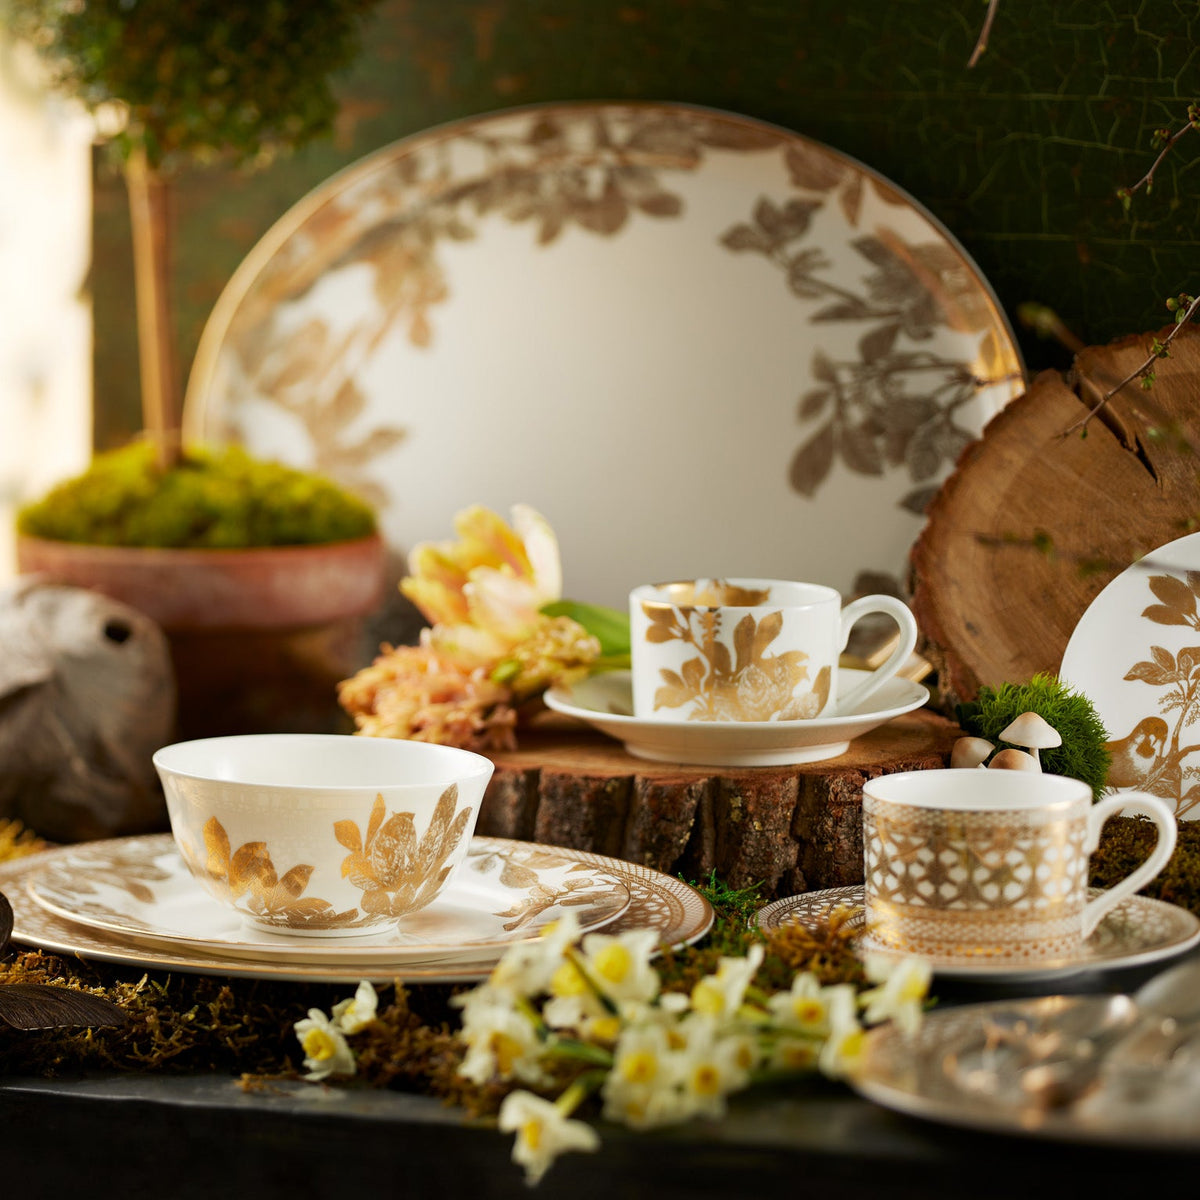 The table is covered in Hawthorne Gilt Cup &amp; Saucer moss from Caskata Artisanal Home.